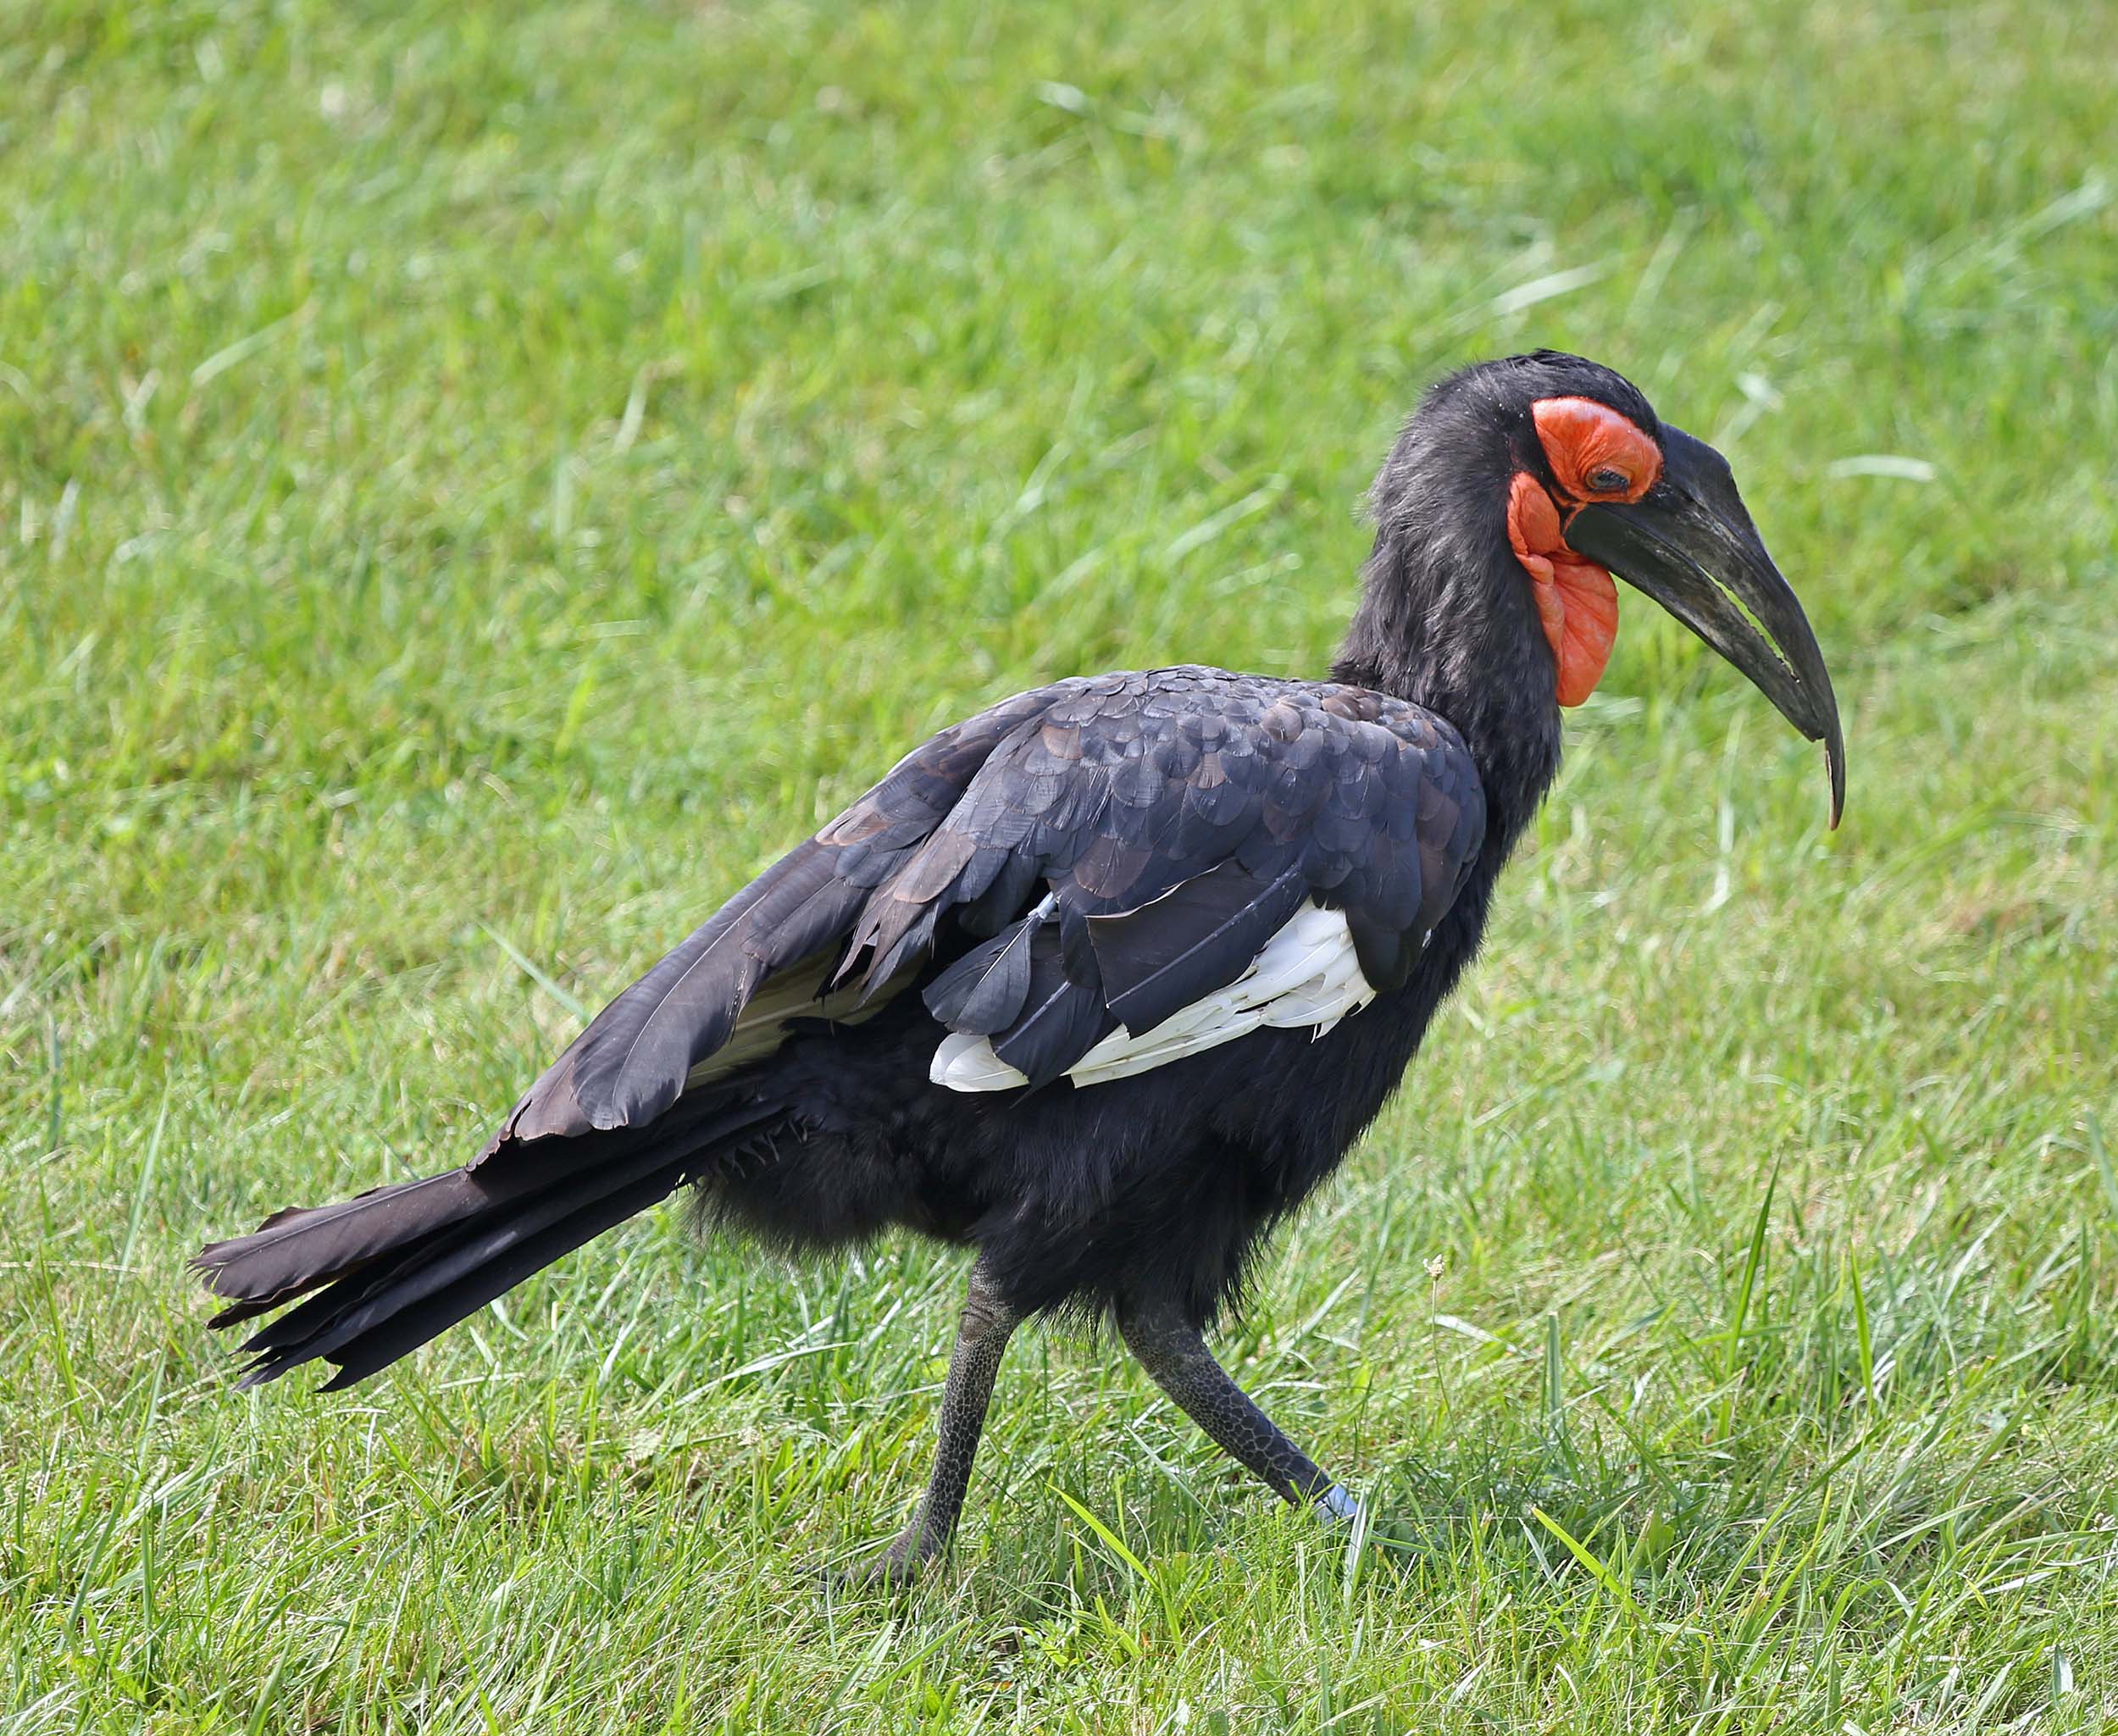 Image of Southern Ground-Hornbill